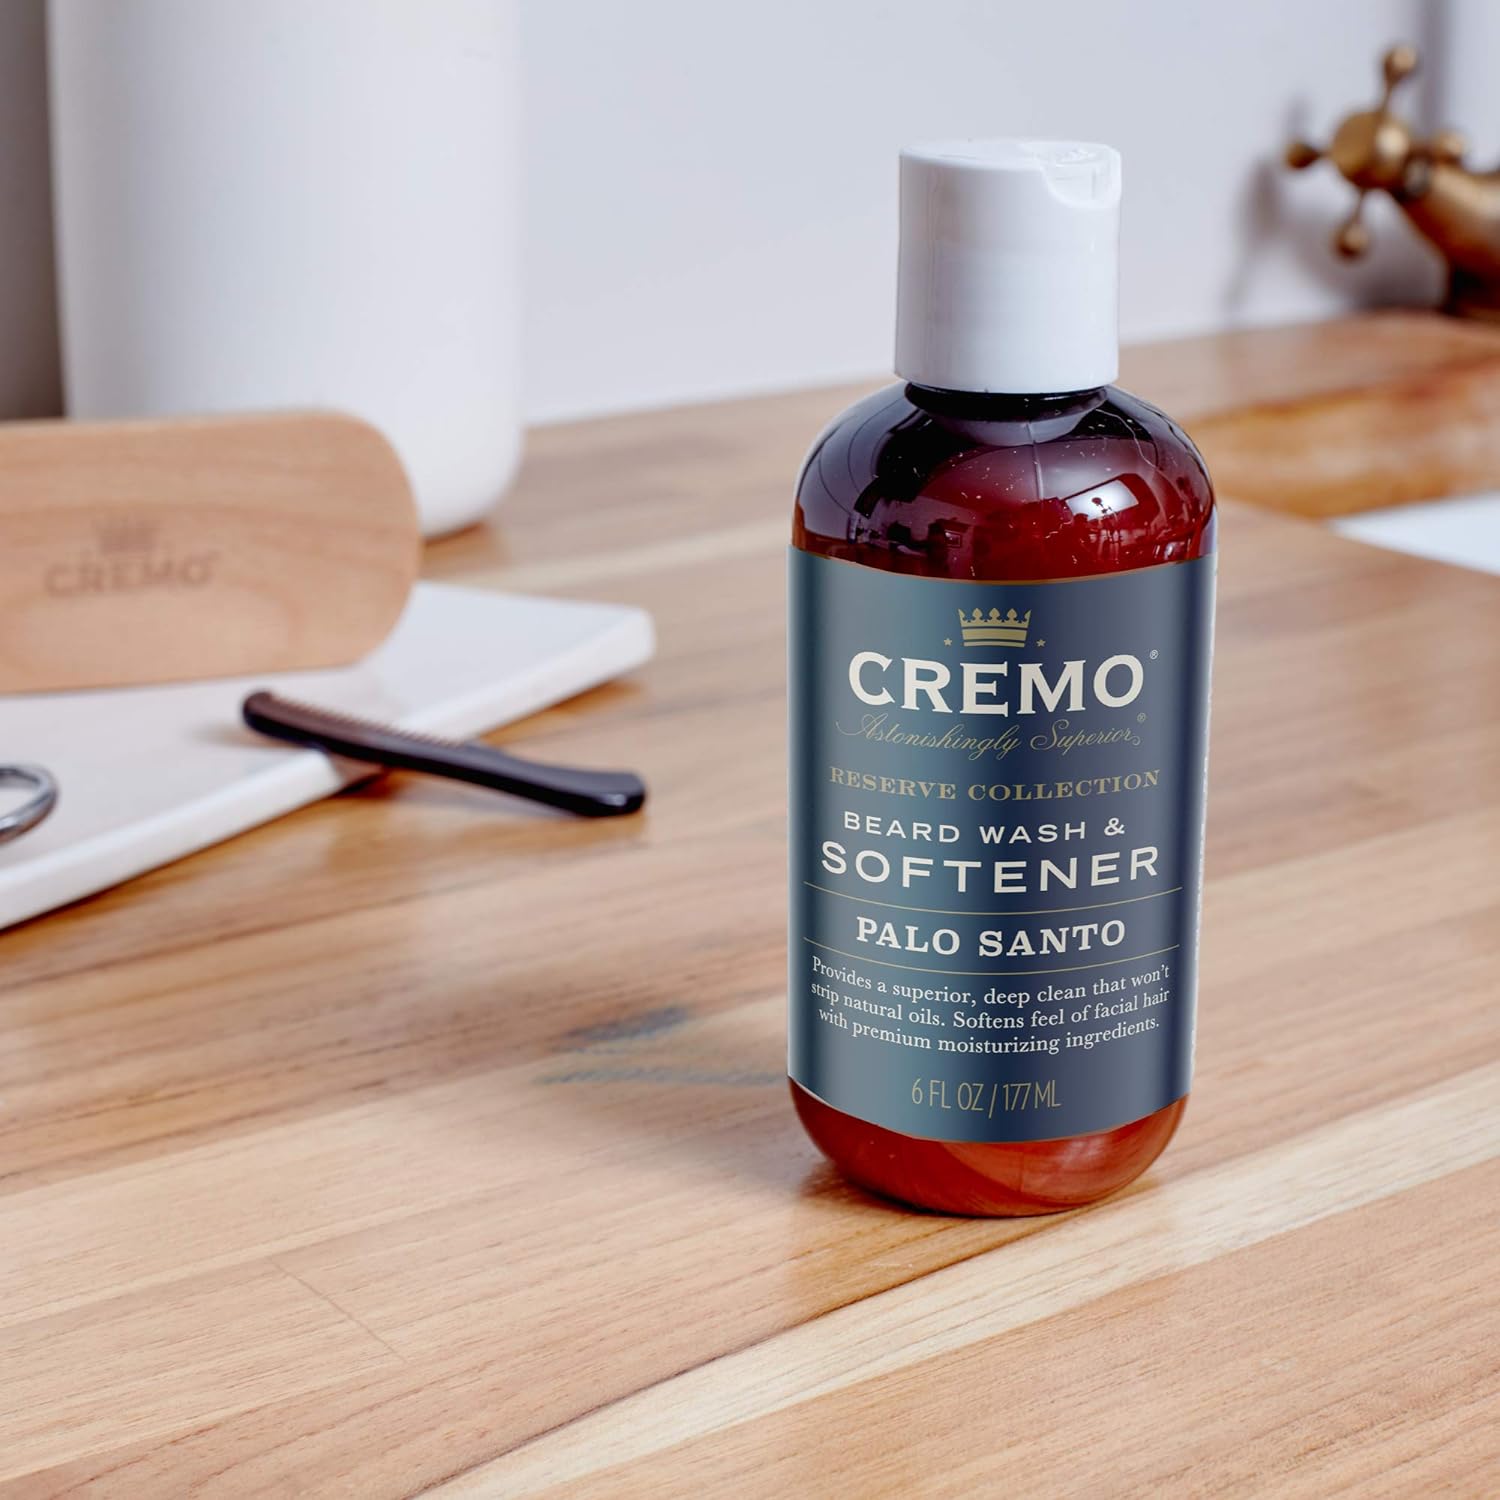 Cremo Palo Santo (Reserve Collection) Beard Wash & Softener, Moisturizes, Styles and Reduces Beard Itch for All Lengths of Facial Hair, 6 Fluid Oz : Beauty & Personal Care